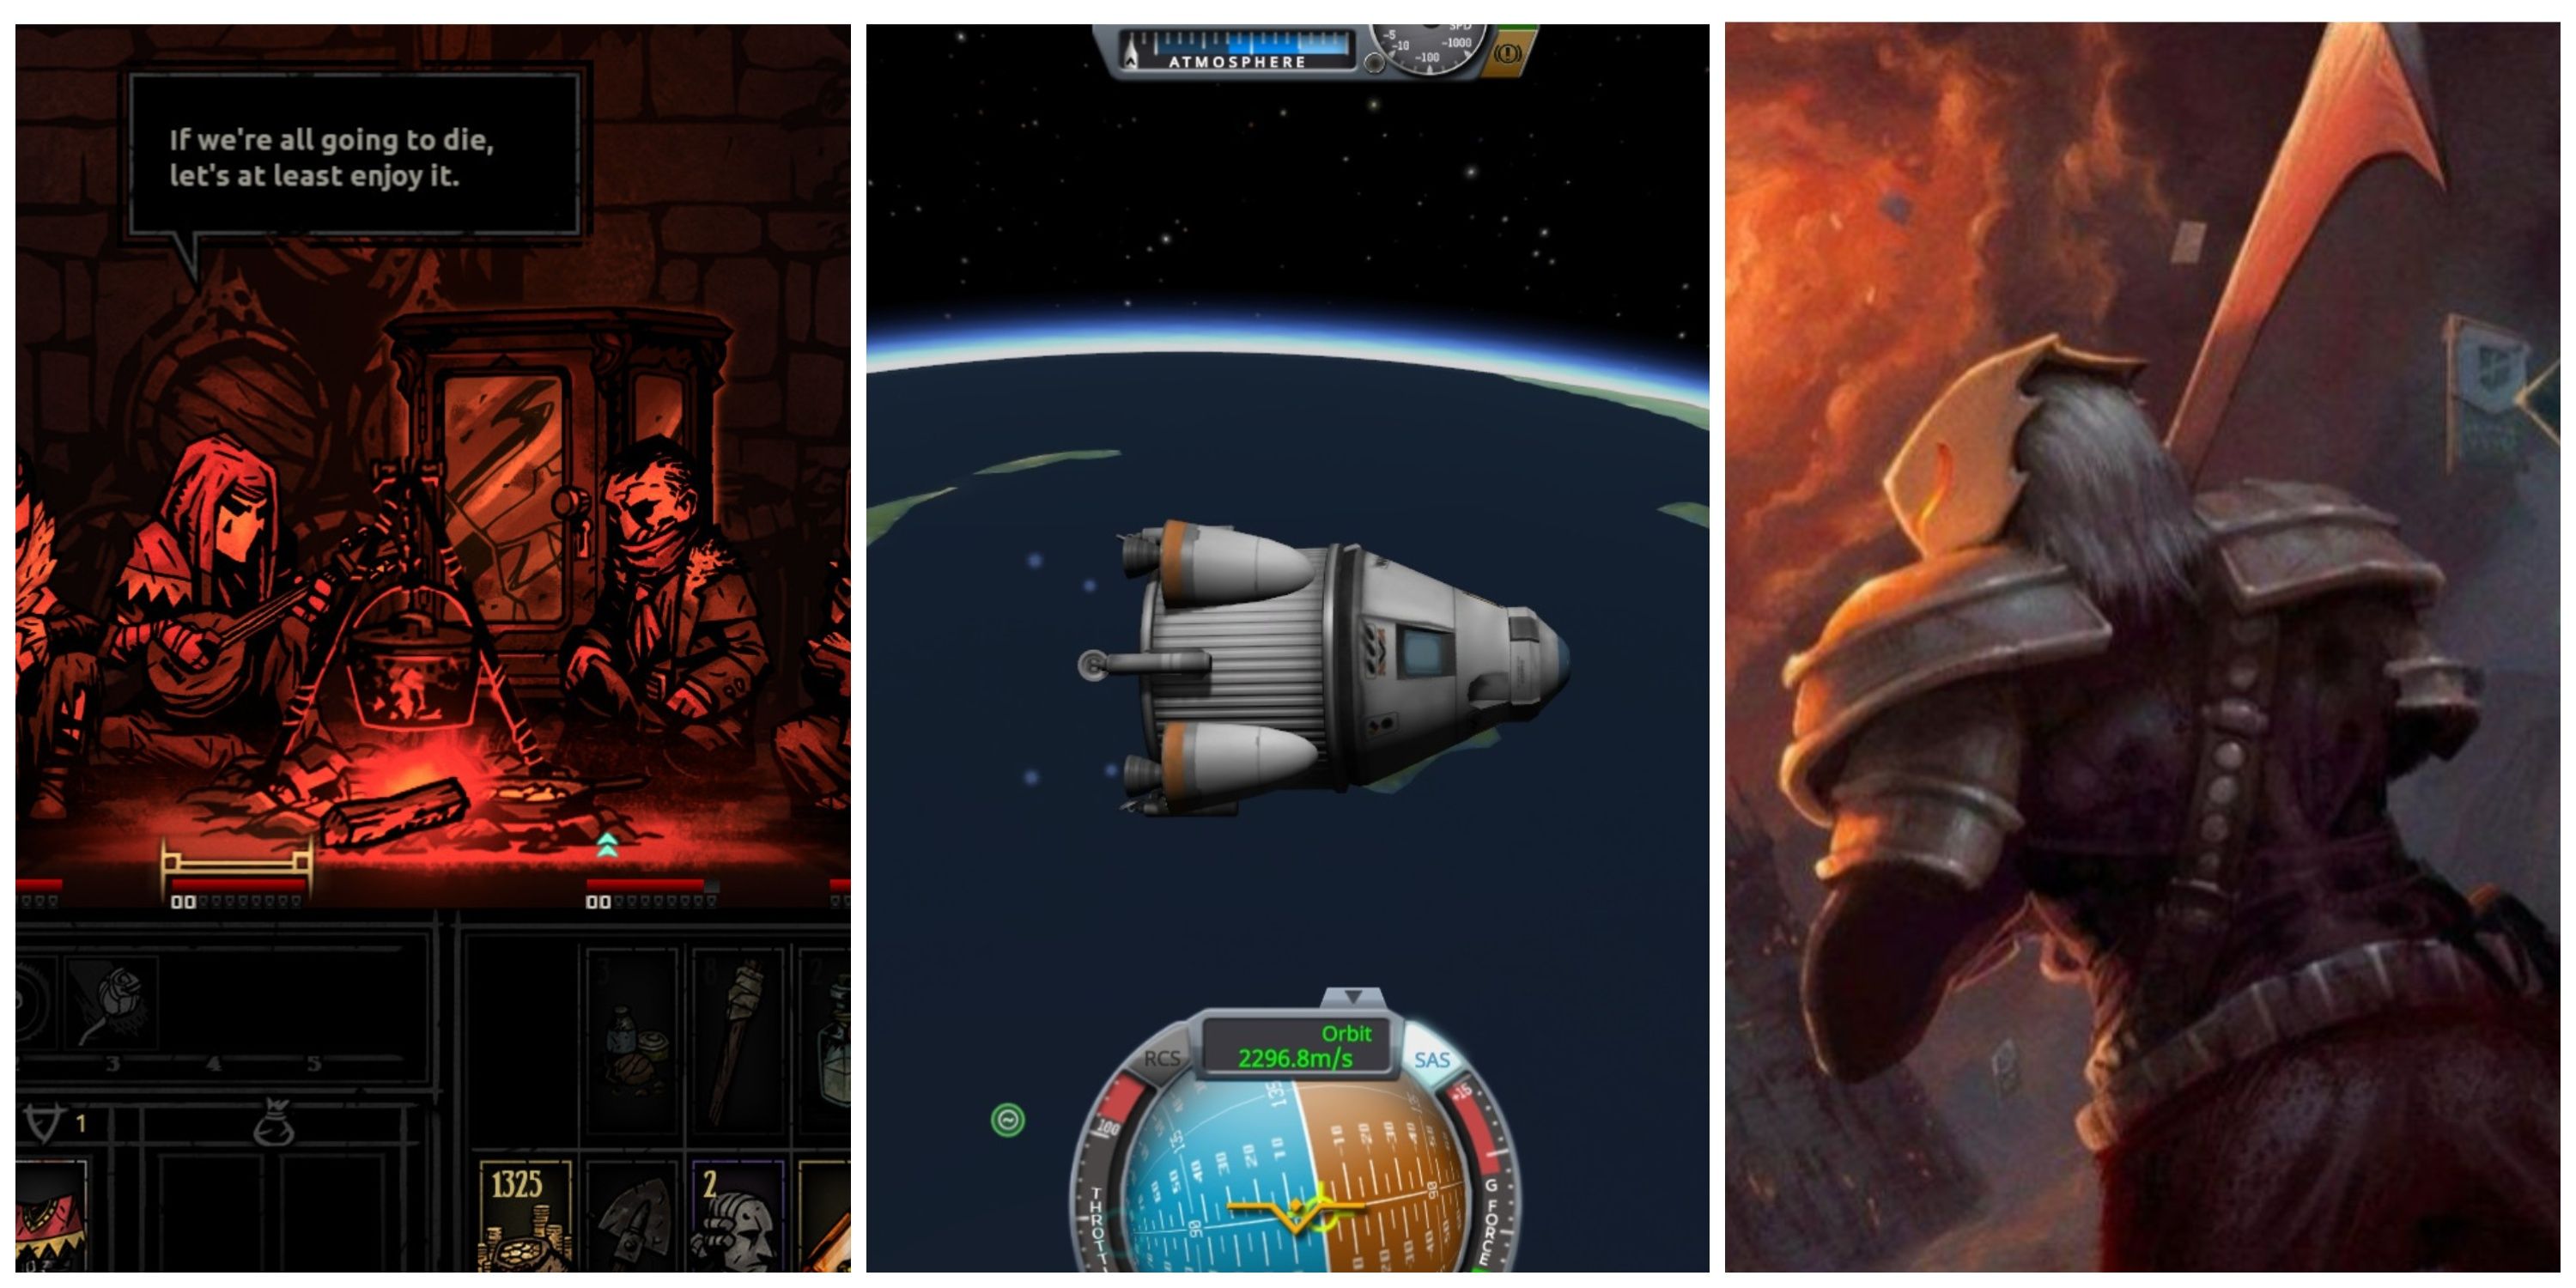 Best Early Access Games That Made It To 1.0 (Featured Image) - Darkest Dungeon + Kerbal Space Program + Slay The Spire